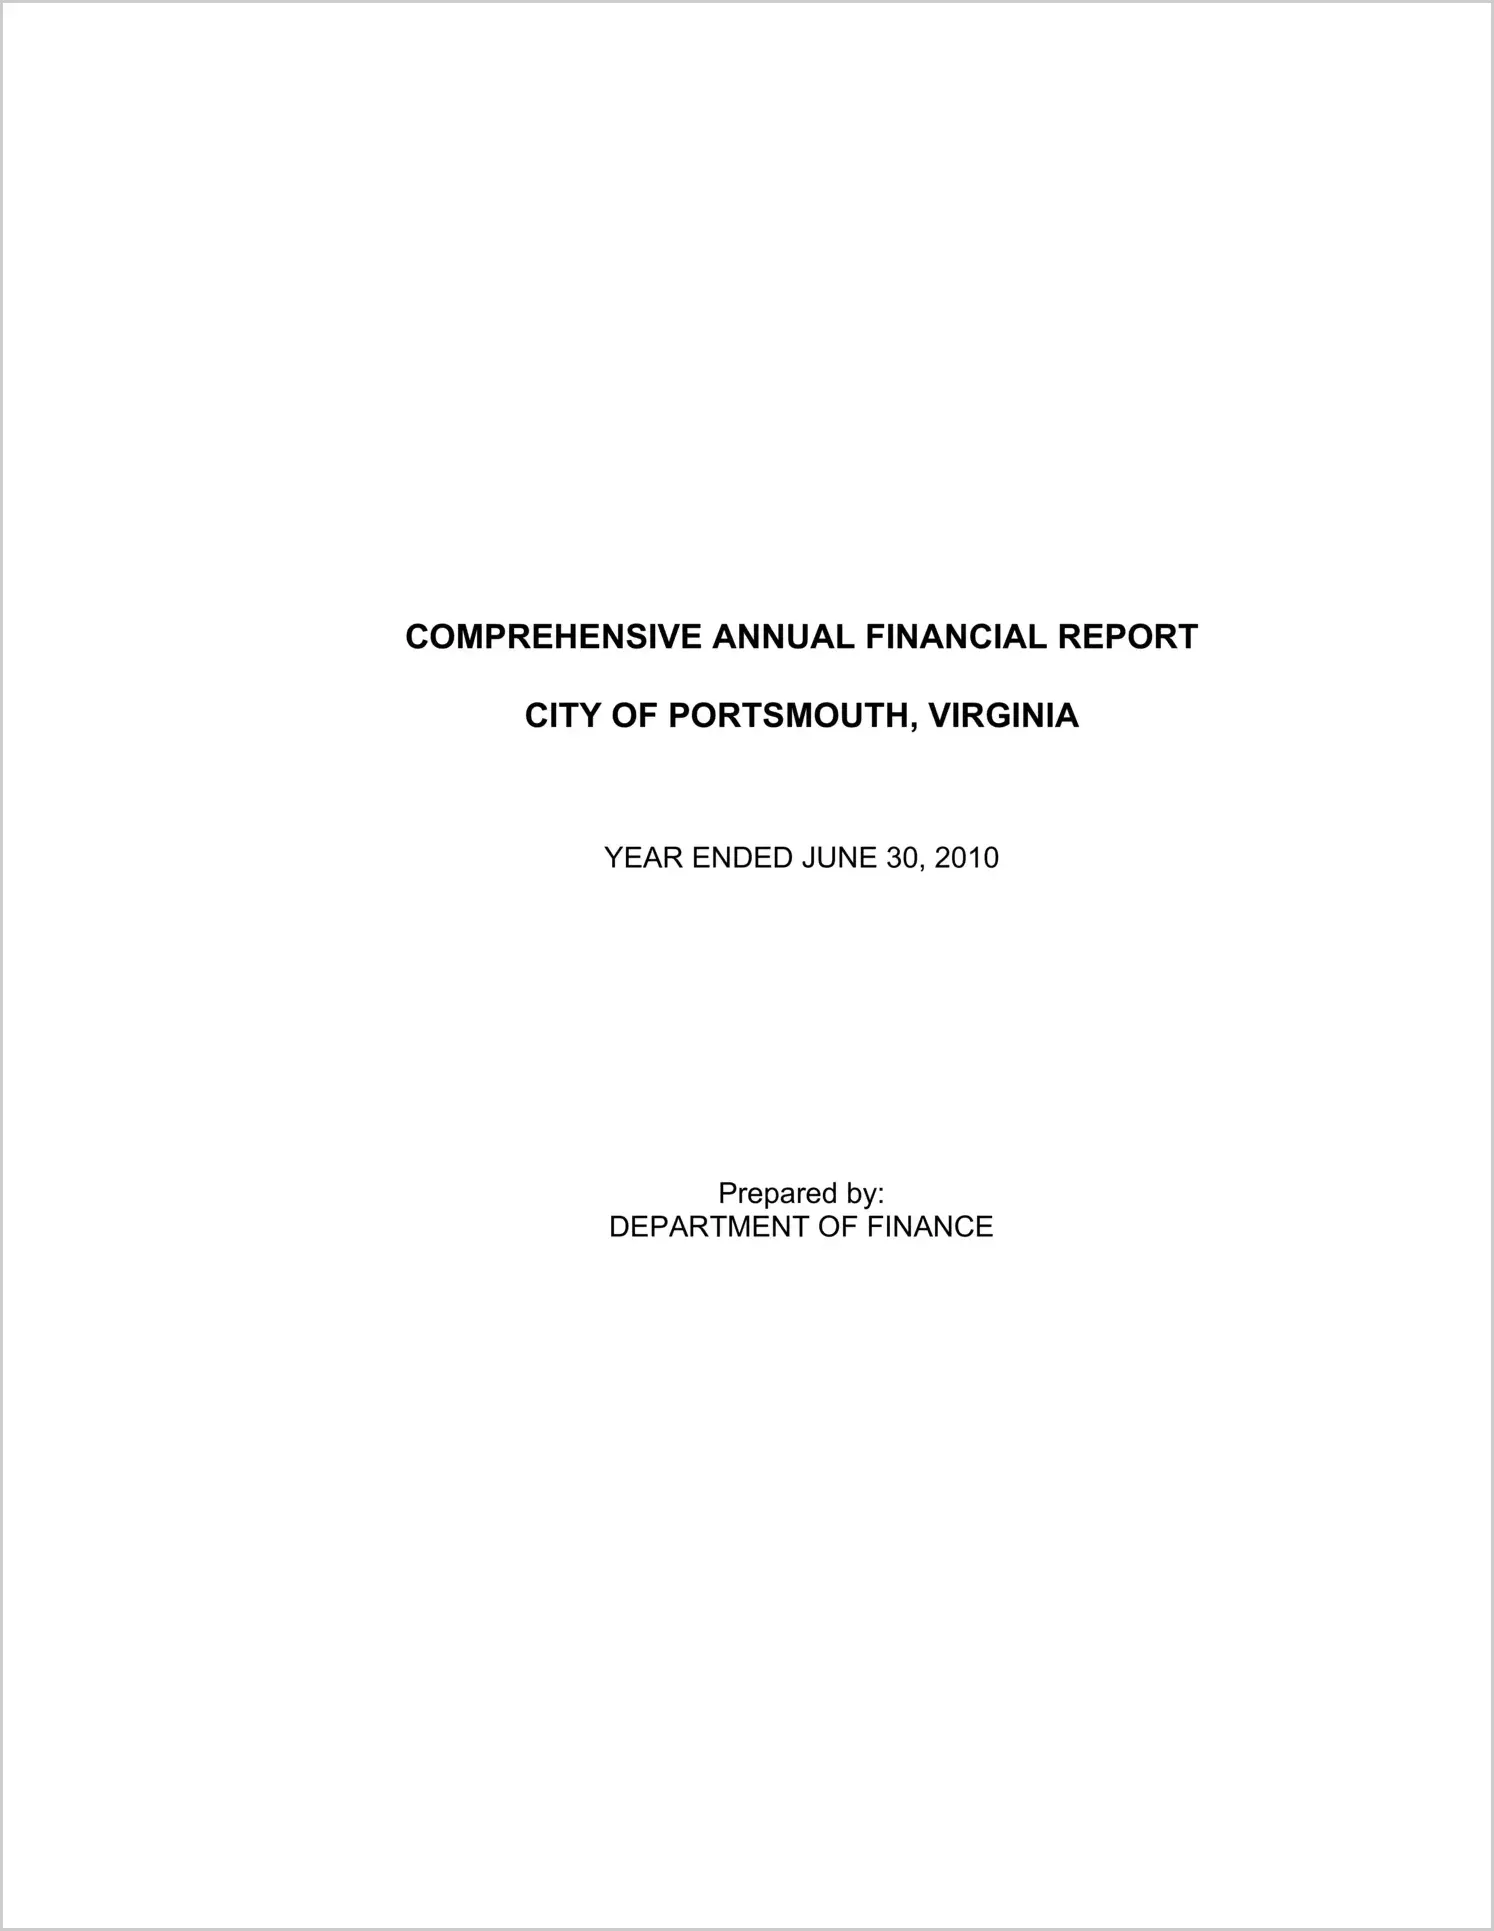 2010 Annual Financial Report for City of Portsmouth